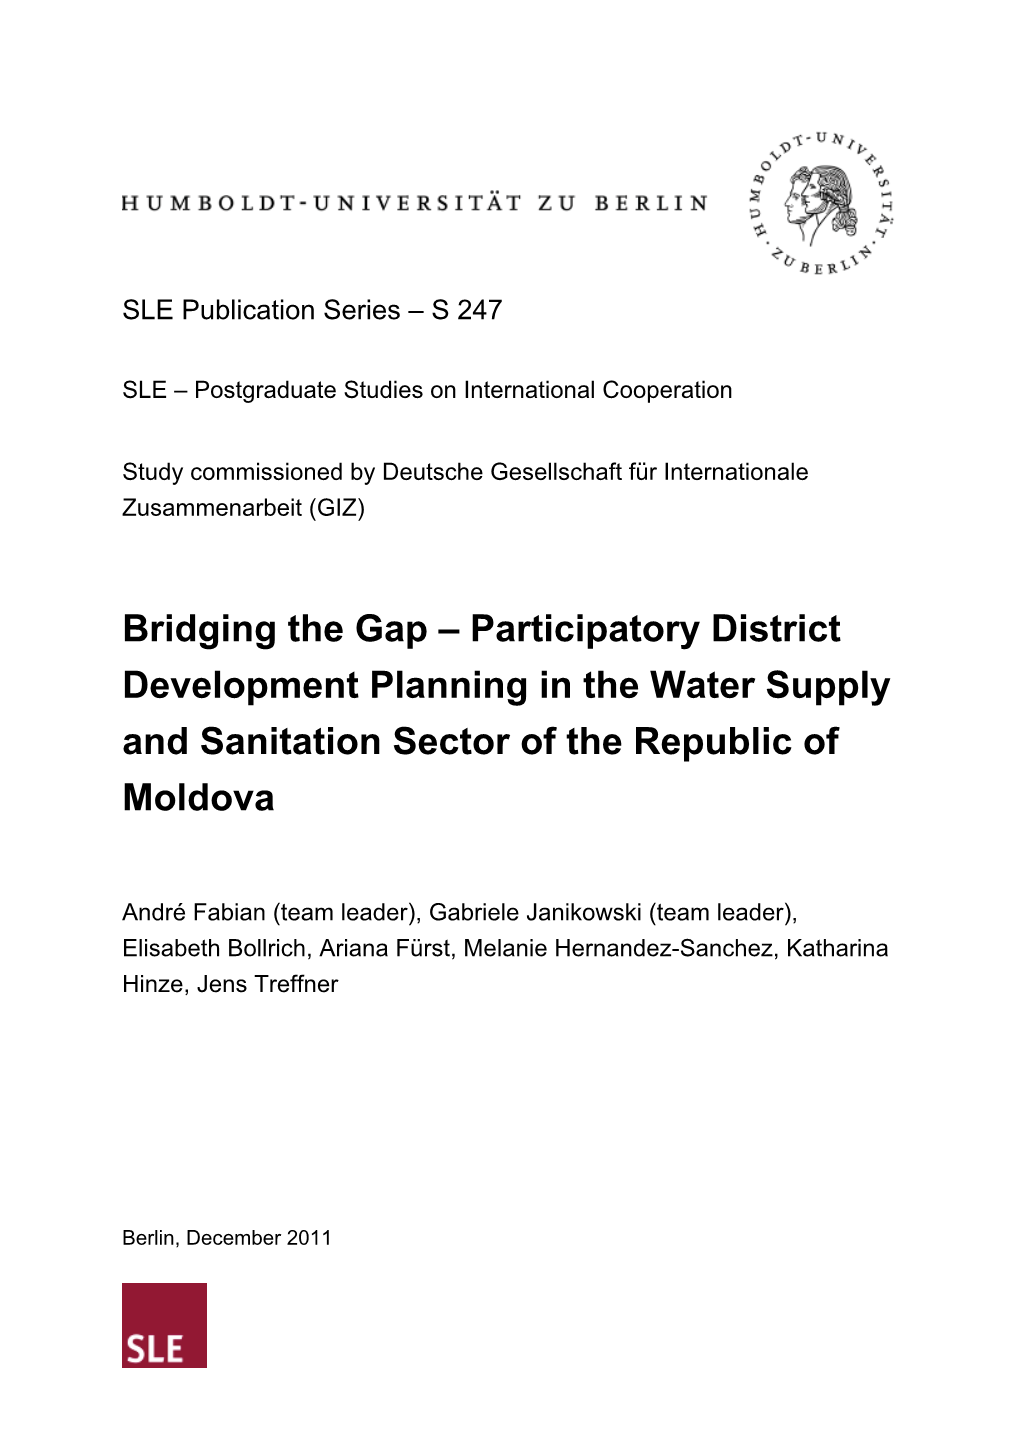 Participatory District Development Planning in the Water Supply and Sanitation Sector of the Republic of Moldova